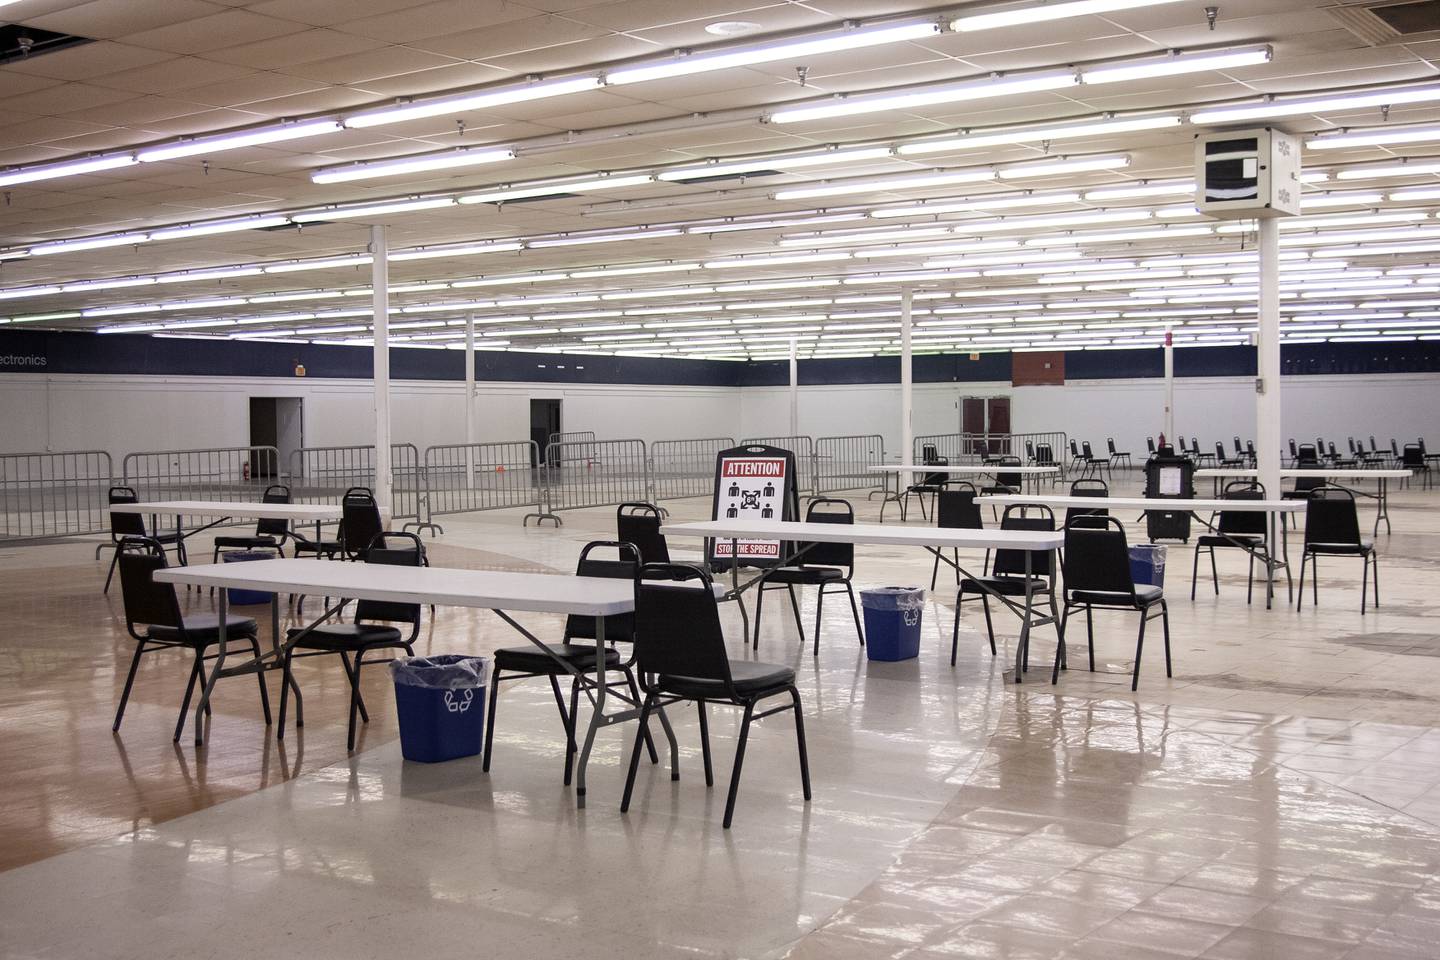 Chairs and tables are arranged Thursday, Feb. 18, 2021, for COVID-19 vaccinations at the former Kmart at 1900 N. Richmond Road.